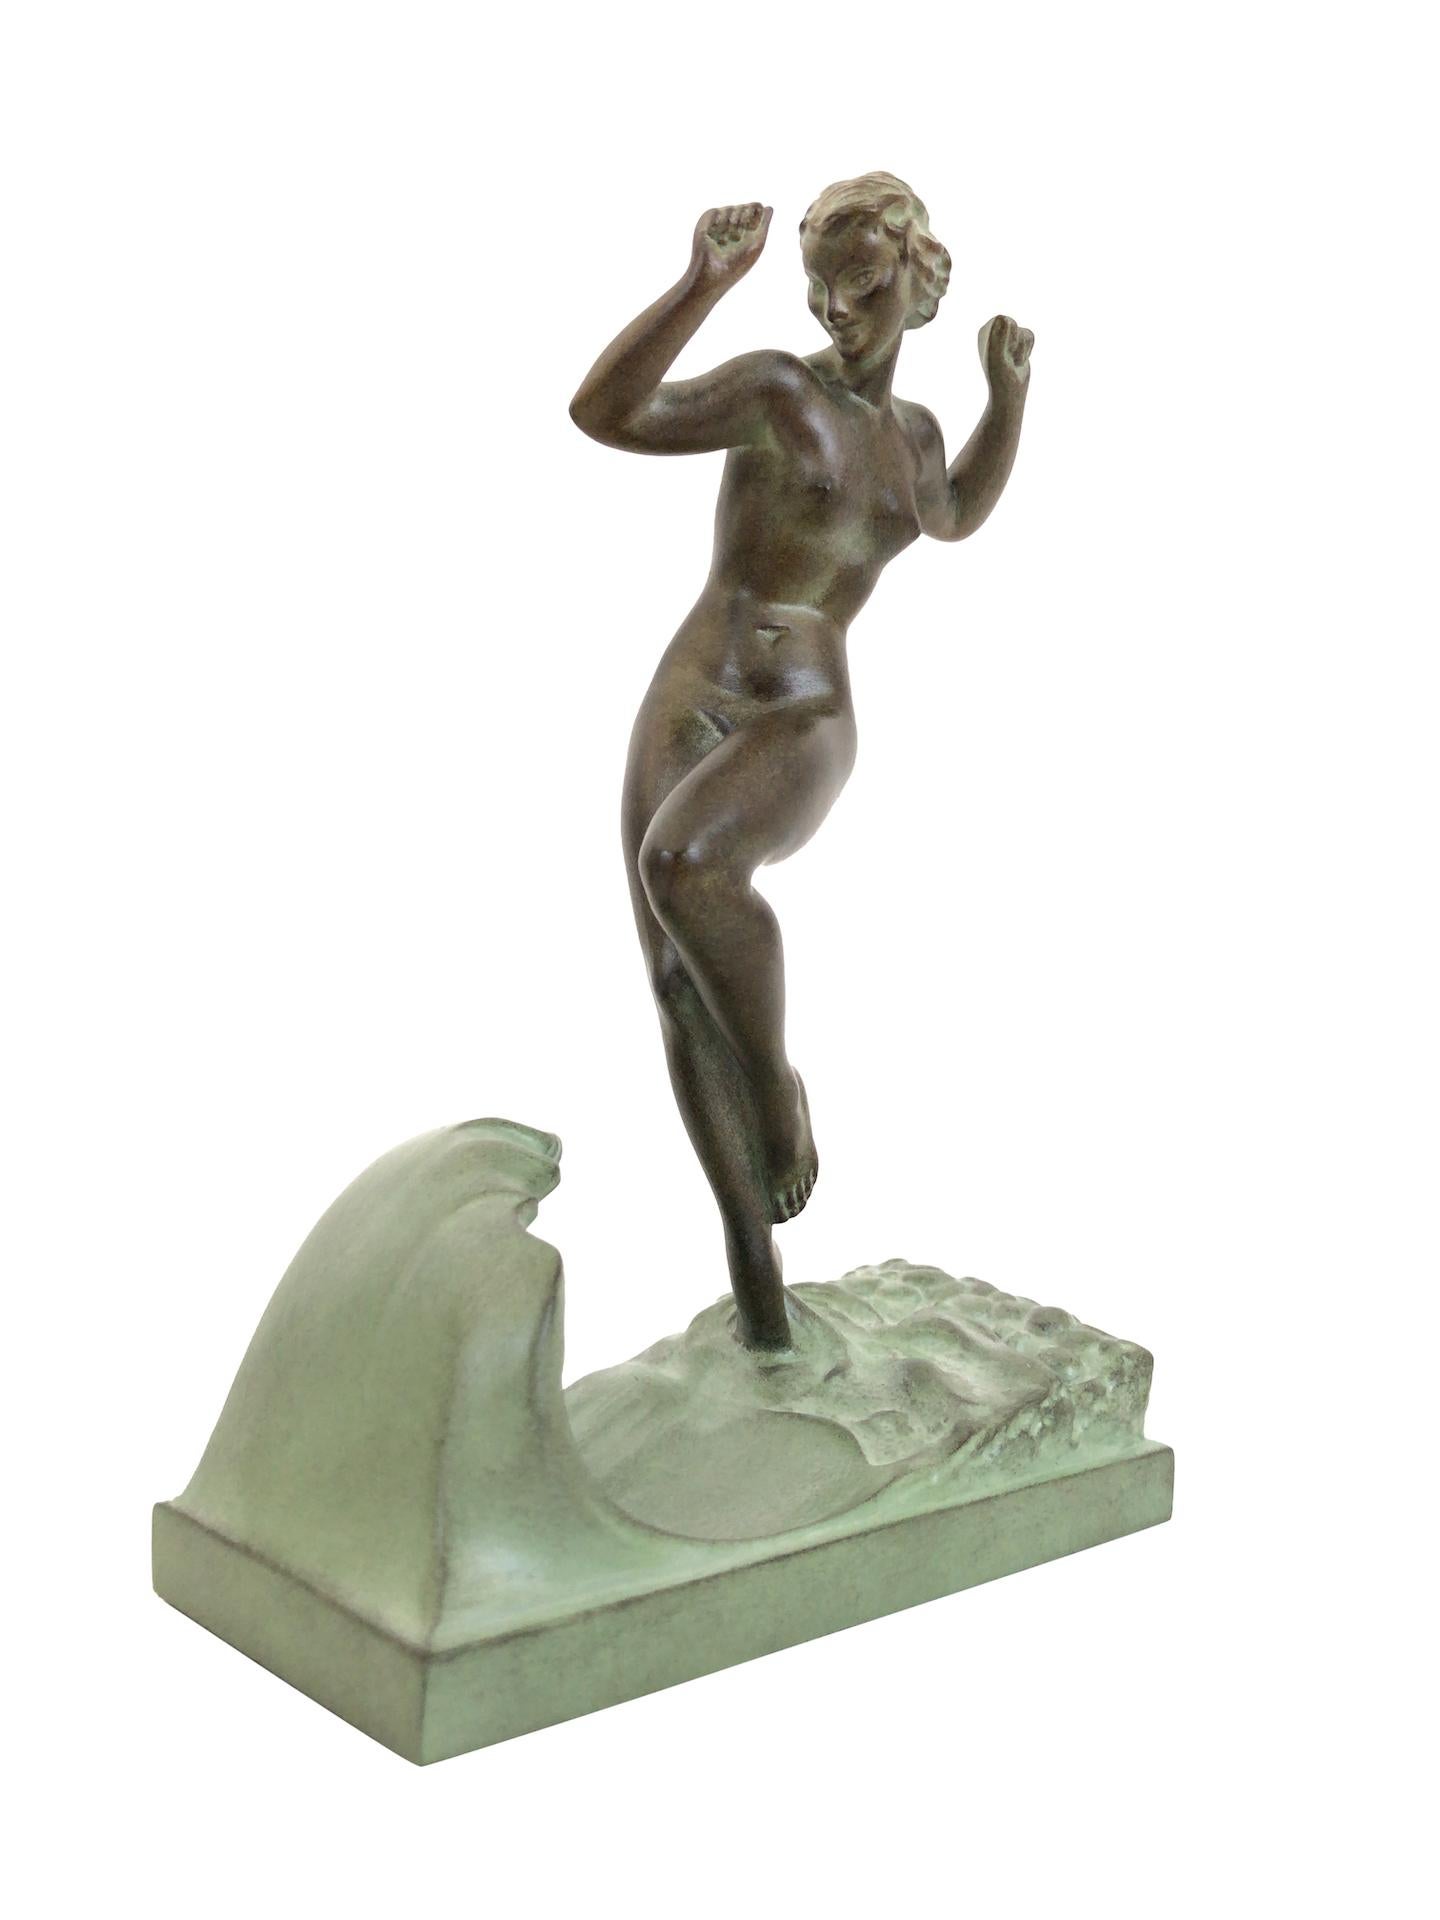 French Art Deco Sculpture Vague from Raymonde Guerbe by Atelier Max Le Verrier For Sale